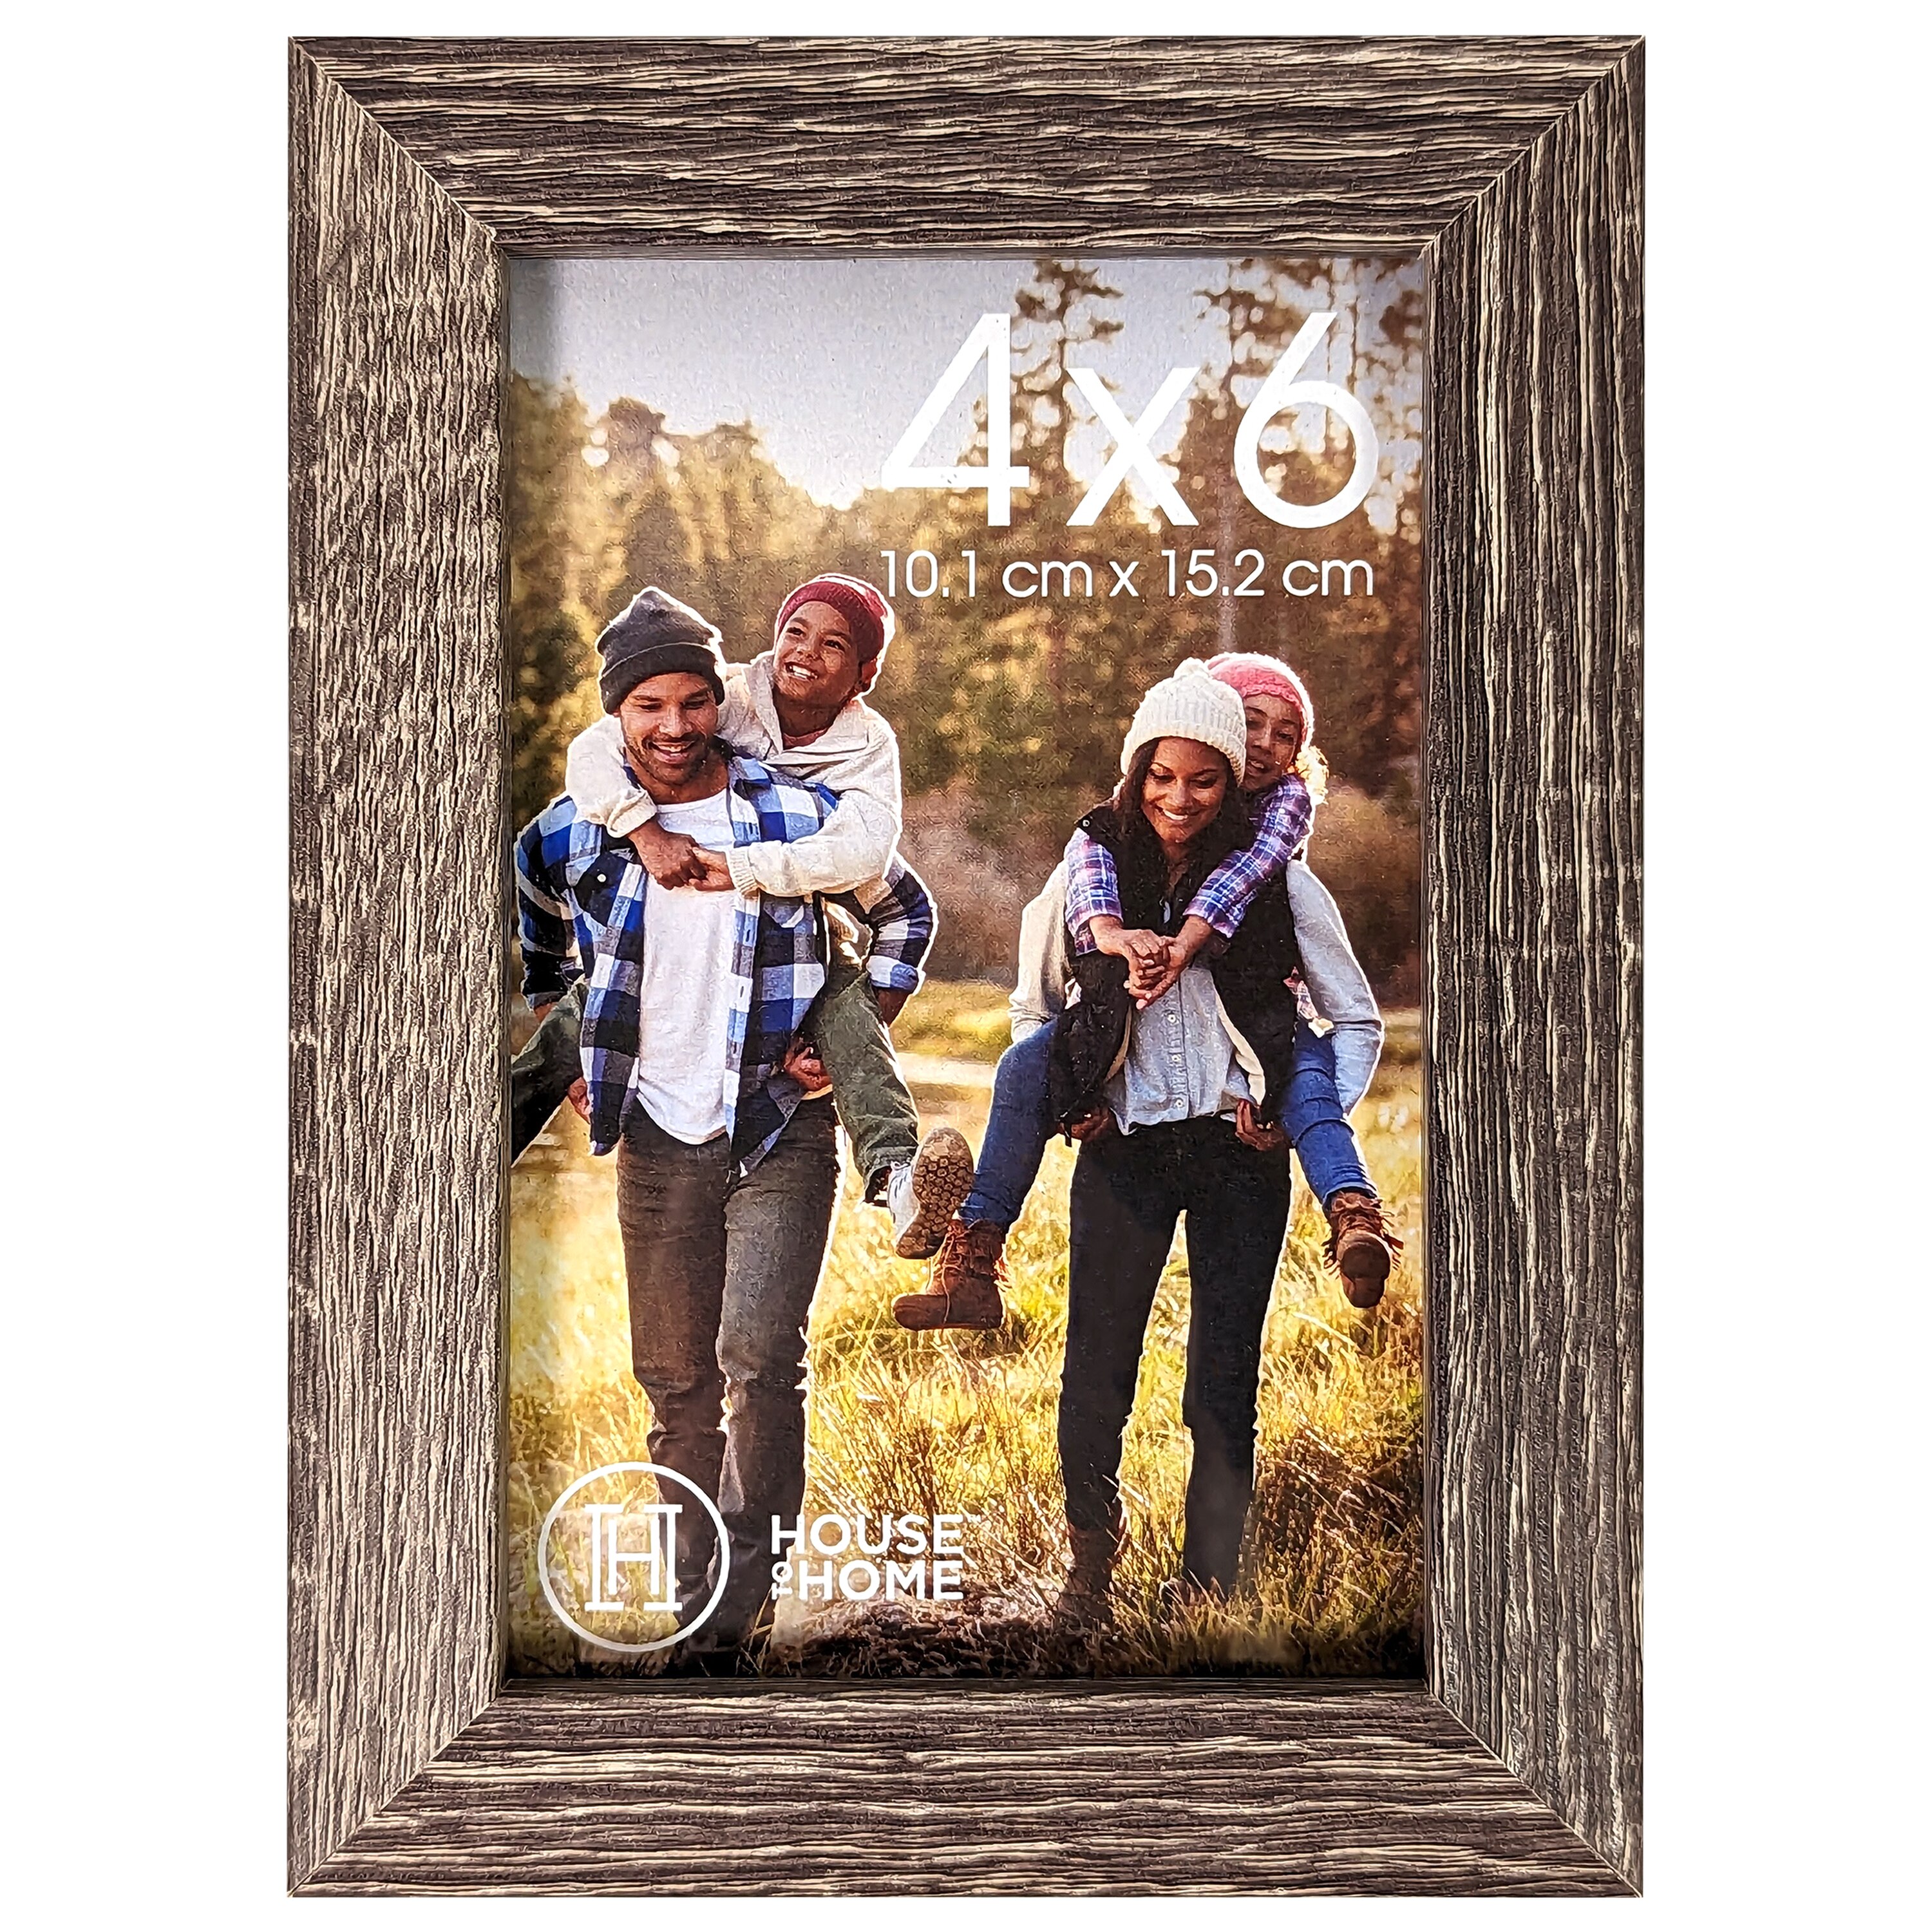 House to Home Jamestown Picture Frame, 4x6